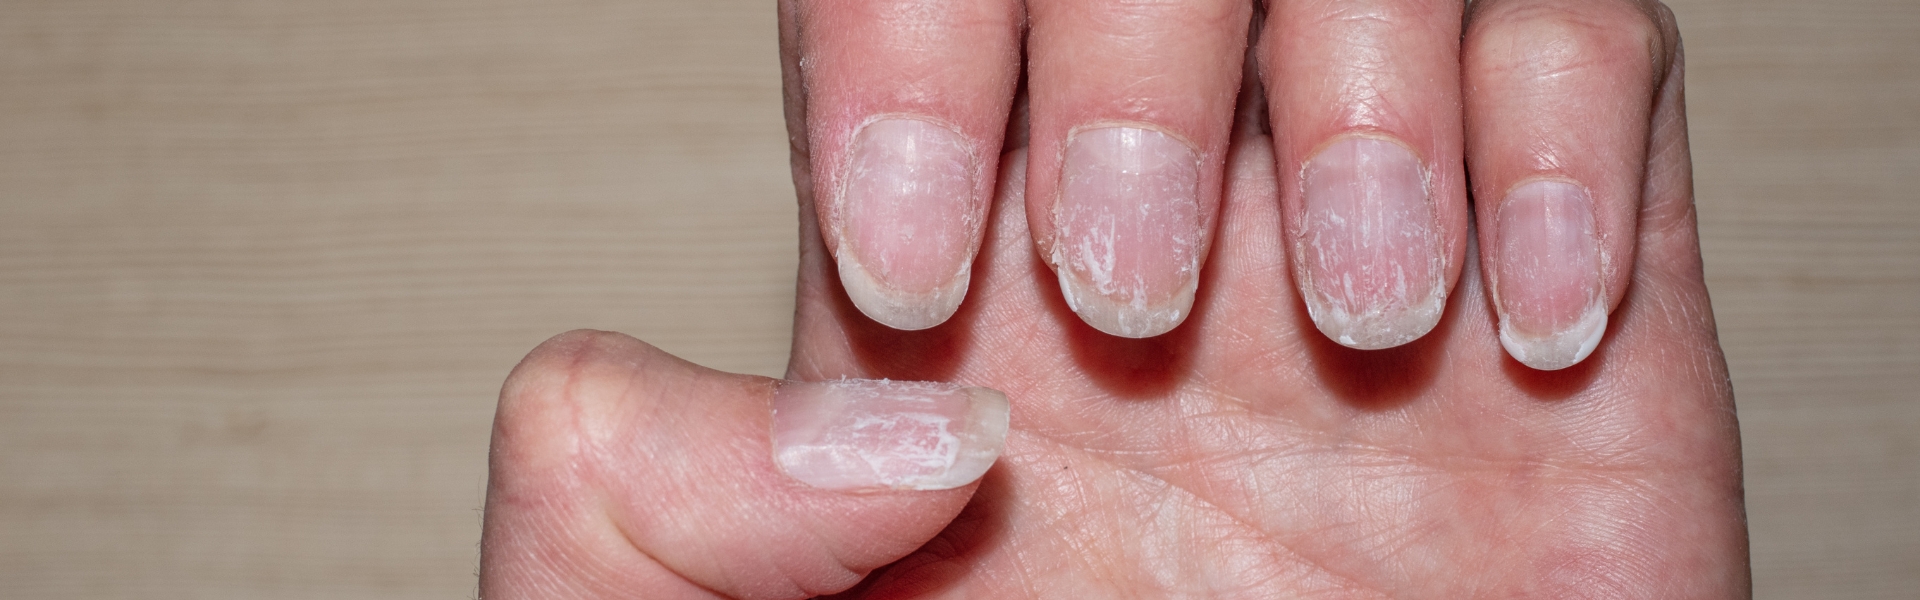 Brittle Nails Treatment in homeopathy